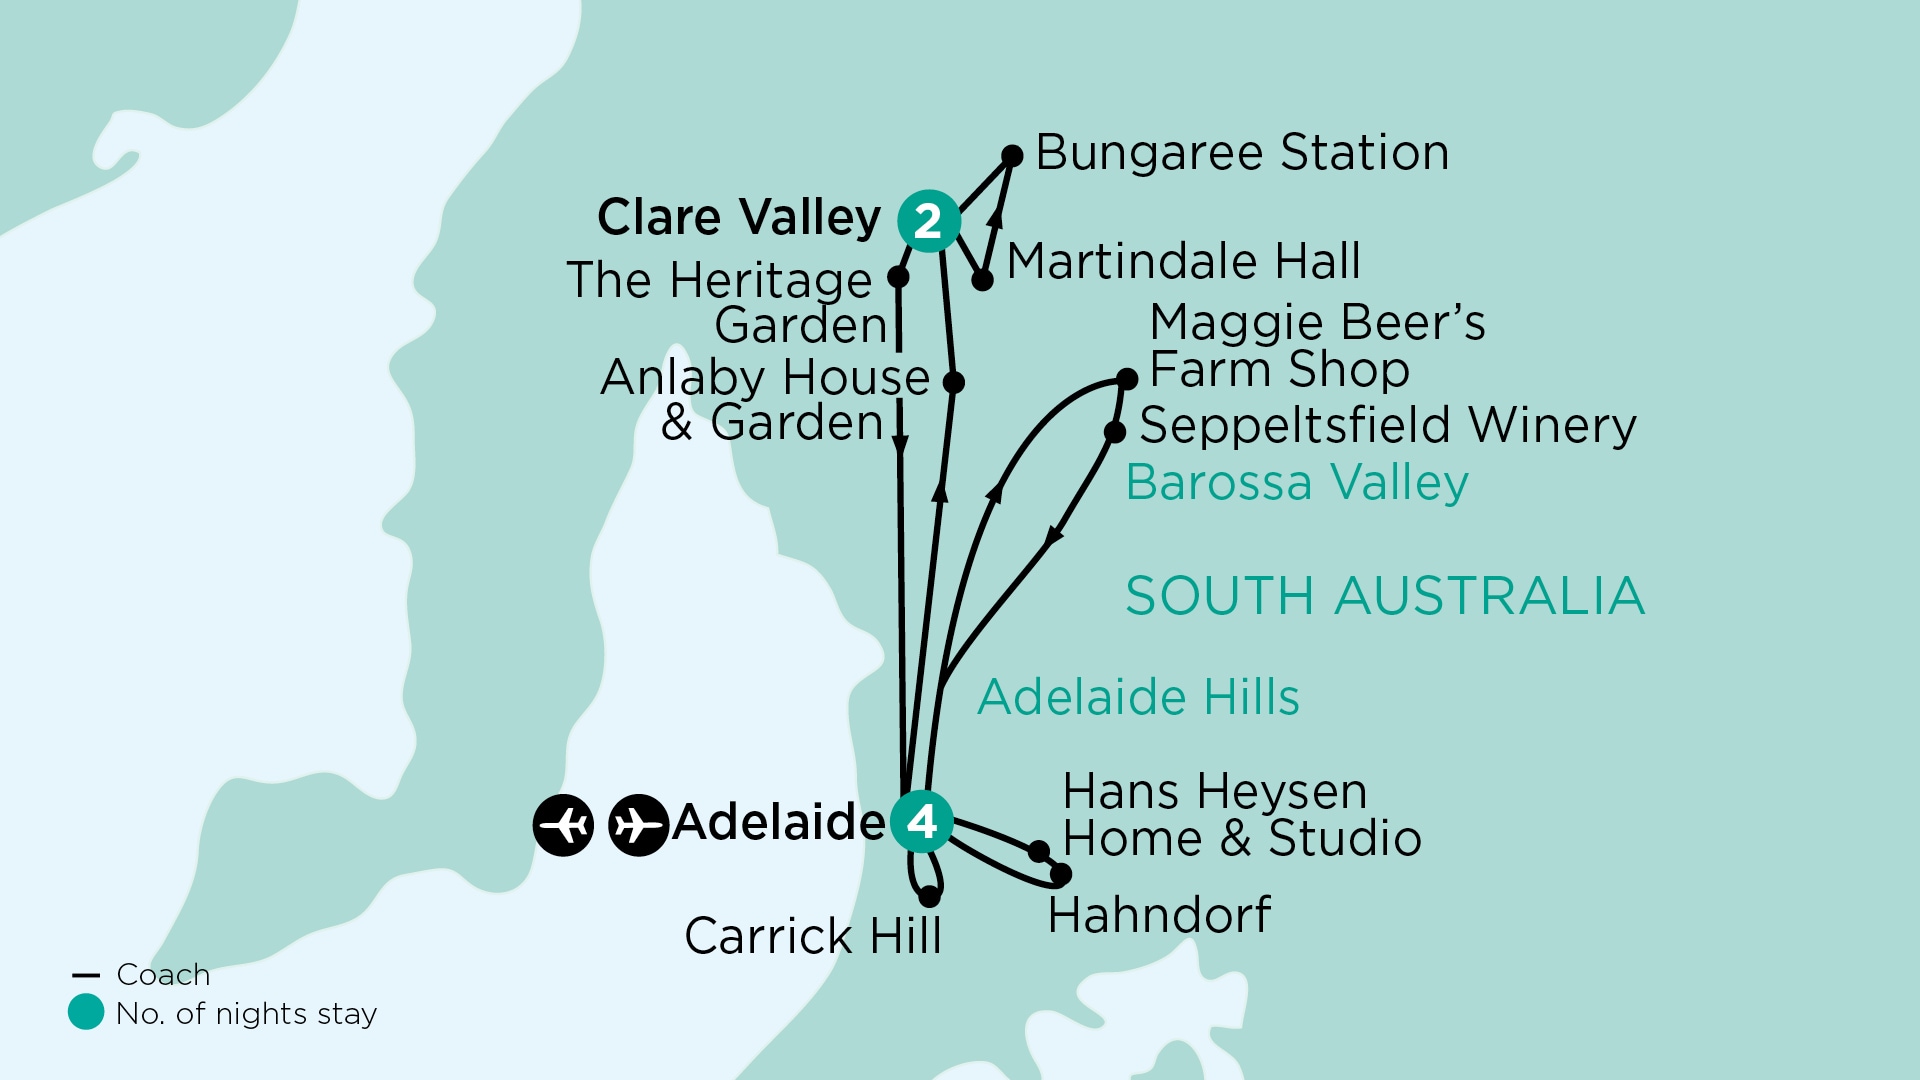 tourhub | APT | Heritage, Art & Rose Gardens of South Australia with Clare Valley | Tour Map